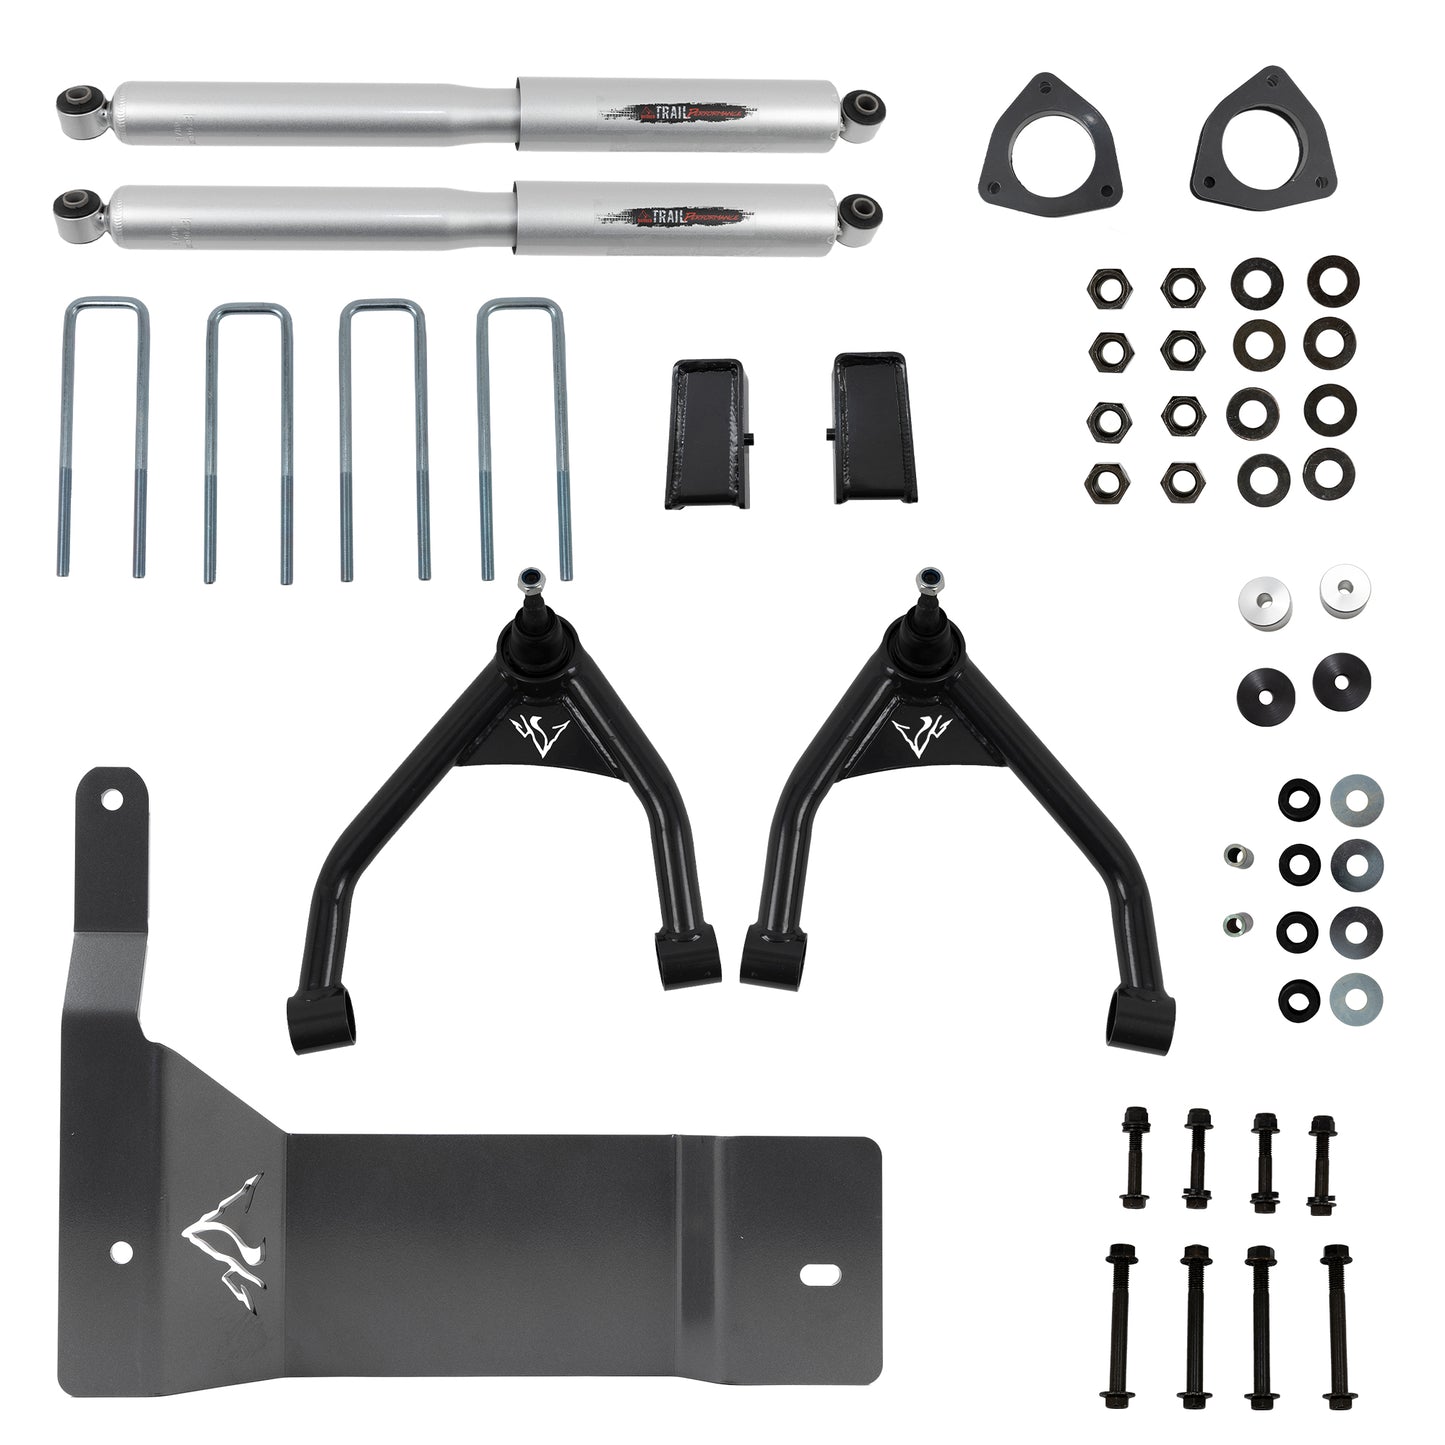 BELLTECH 150207BK LIFT KIT 4 in. Lift Kit Inc. Front and Rear Trail Performance Spacers/Shocks 2007-2016 Silverado / Sierra 1500 4wd (Ext & Crew Cab) 4 in. Lift